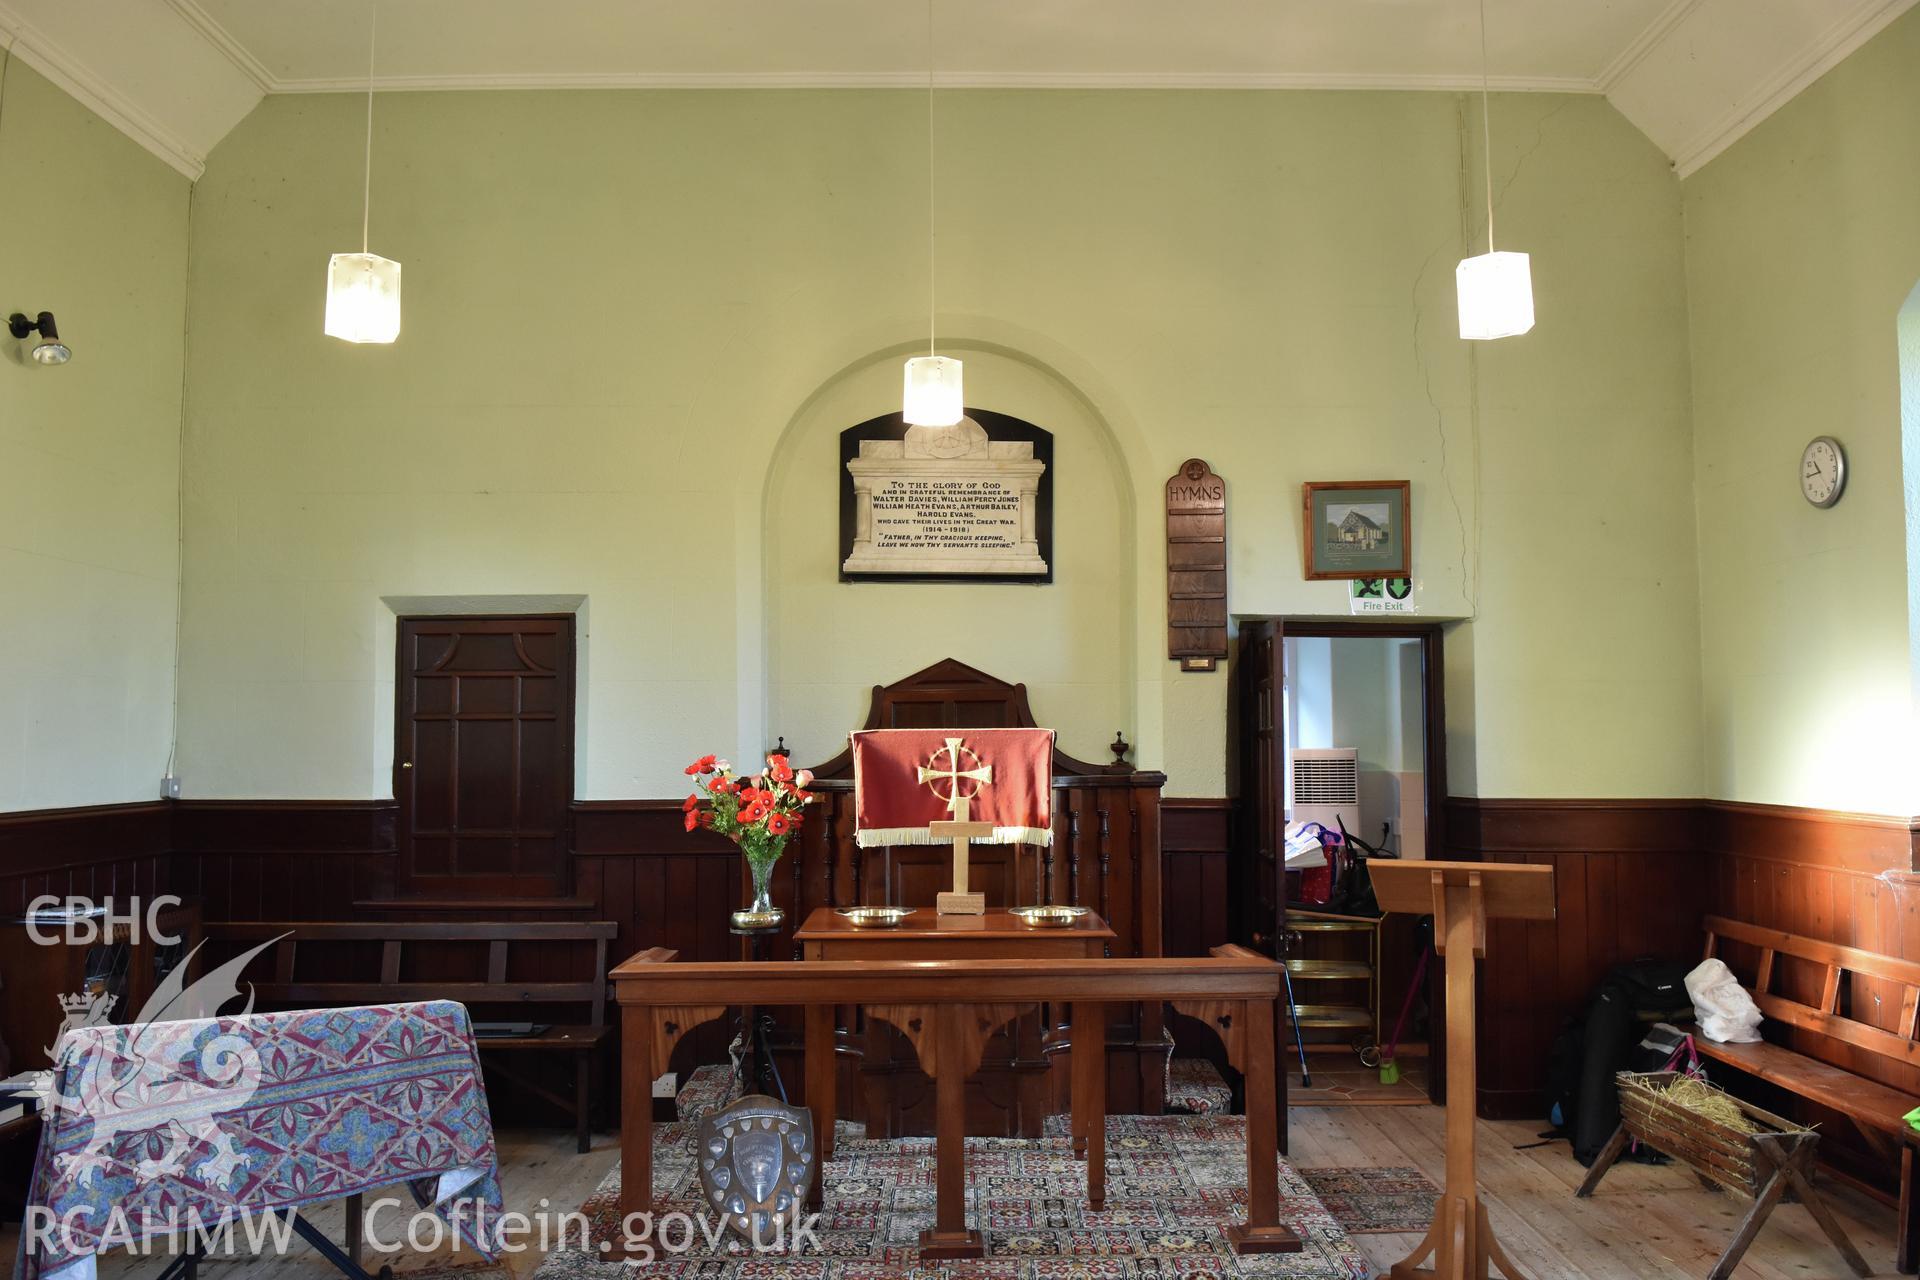 Interior view of Hyssington Primitive Methodist Chapel, Hyssington, Churchstoke, looking towards the front of the chapel with straw-filled manger to the right. Photographic survey conducted by Sue Fielding on 7th December 2018.